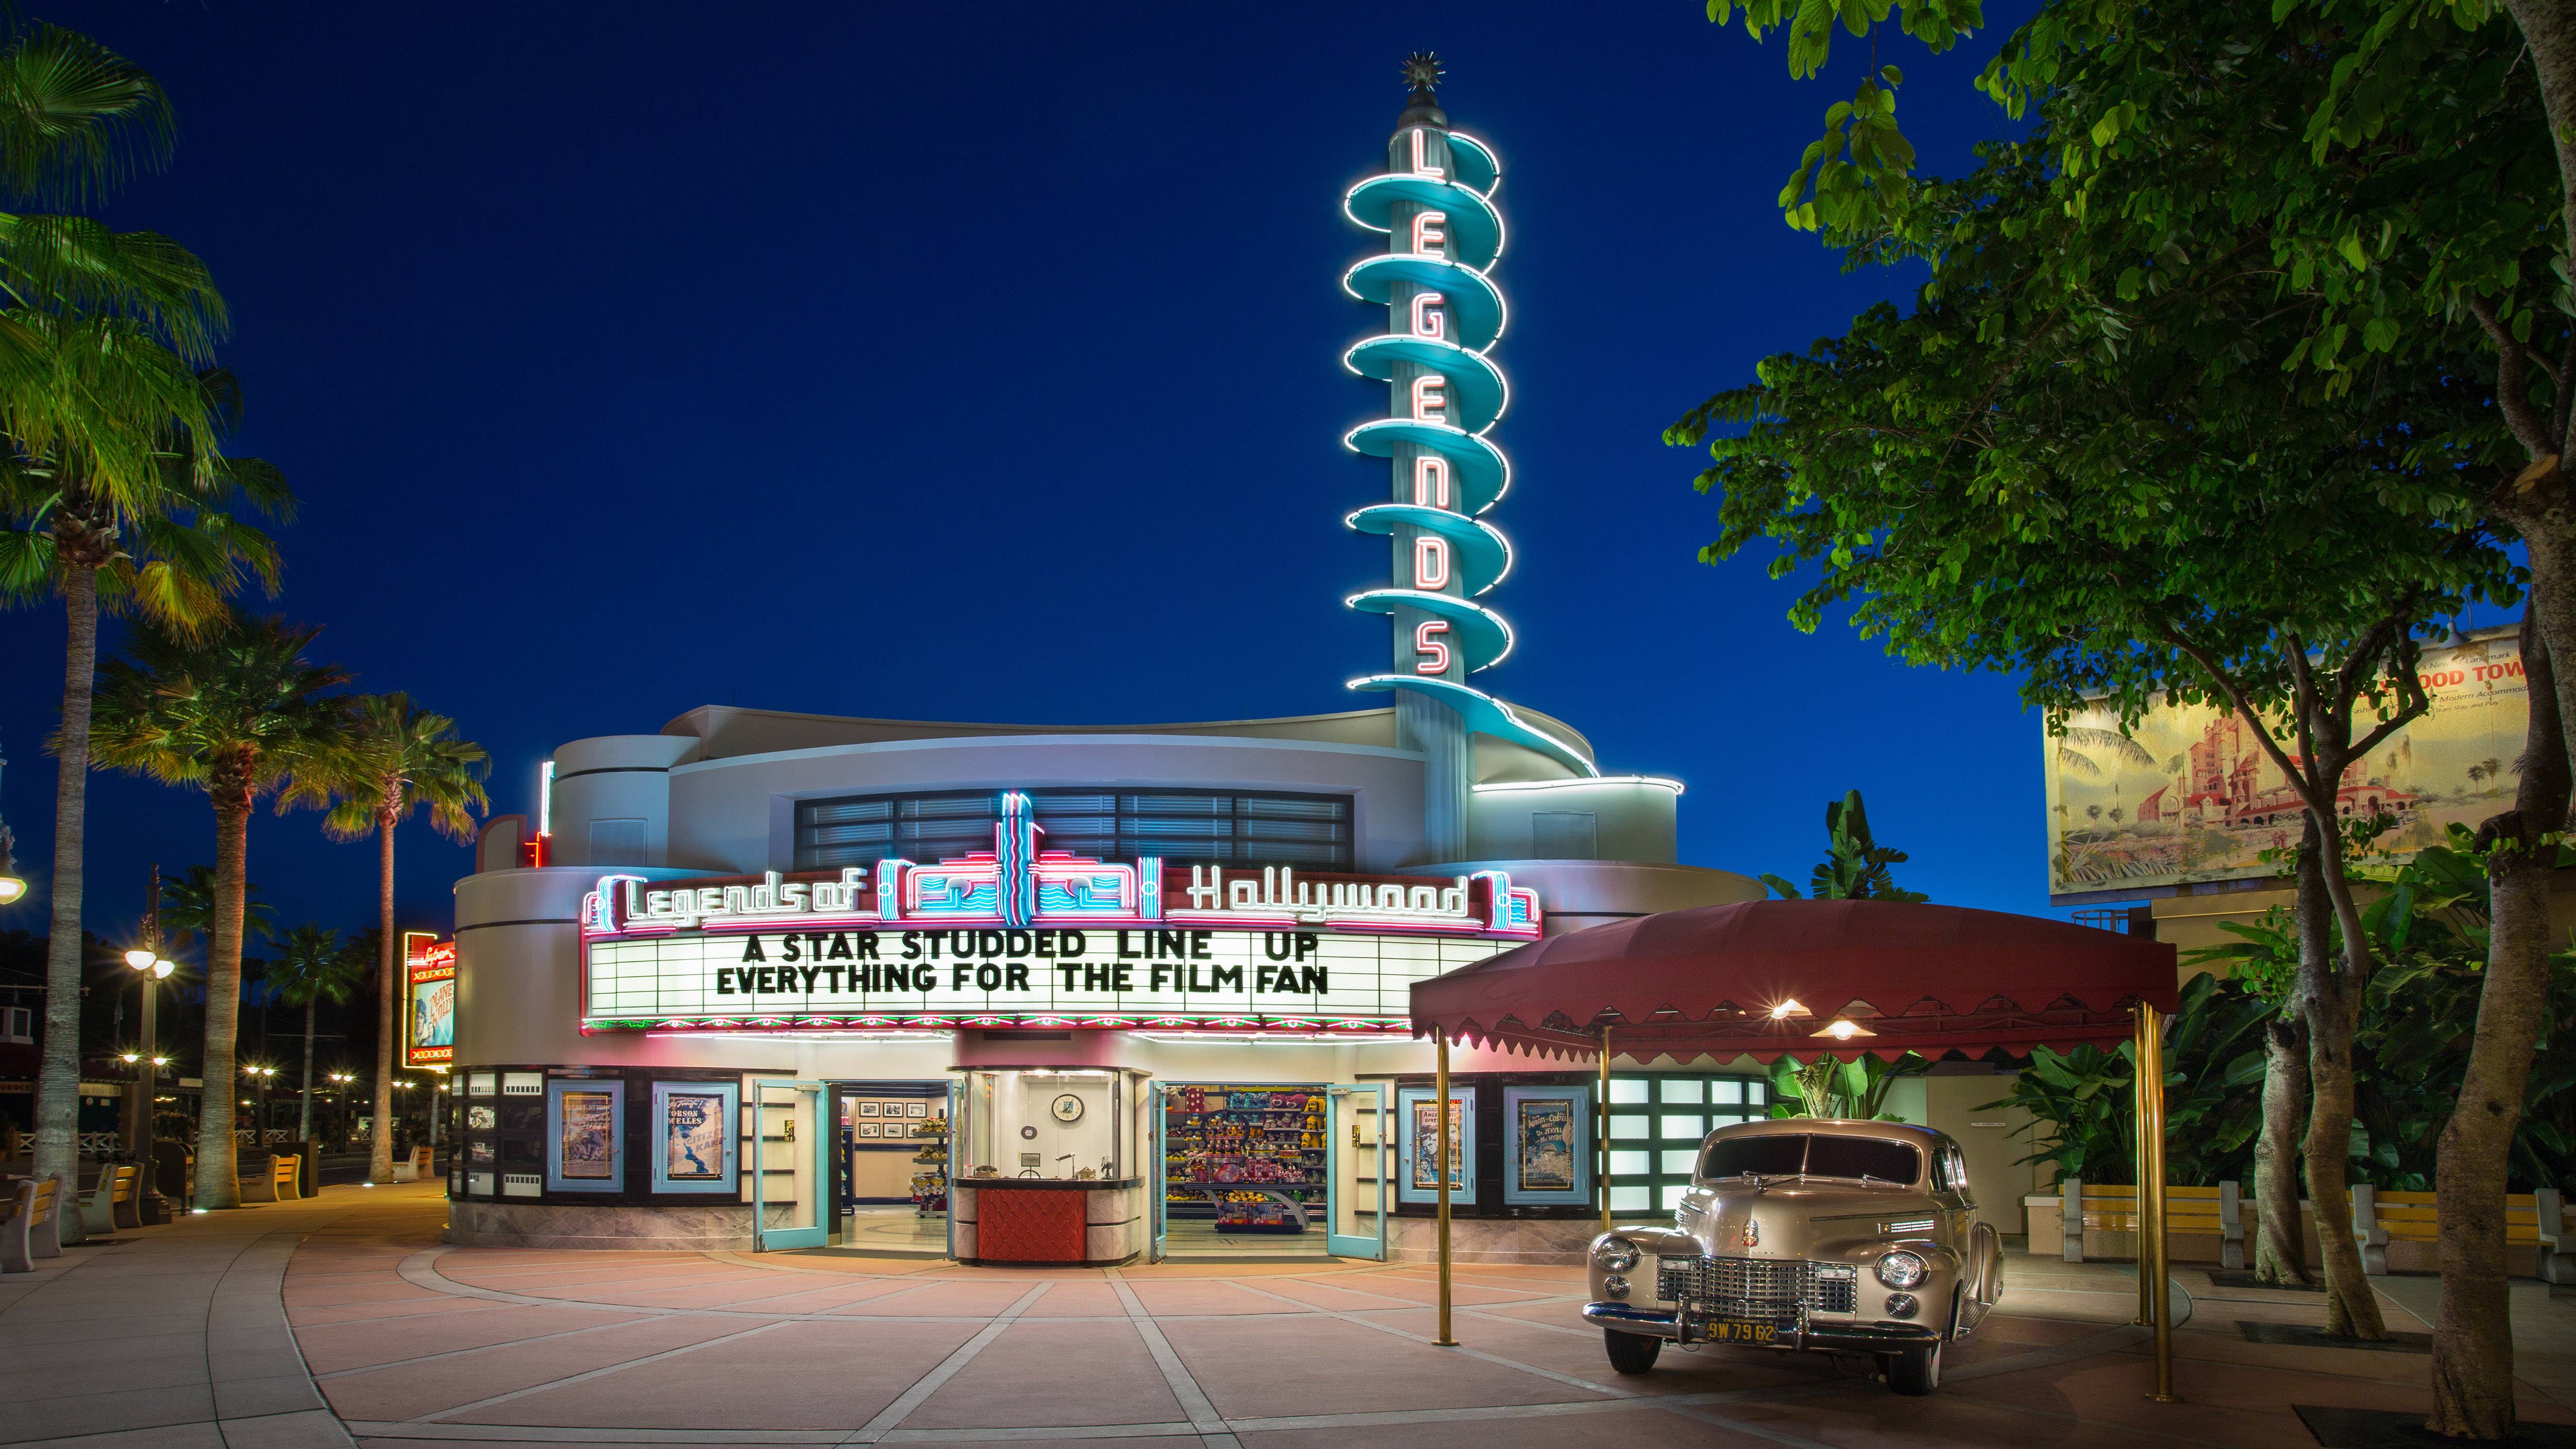 Legends of Hollywood to close for refurbishment